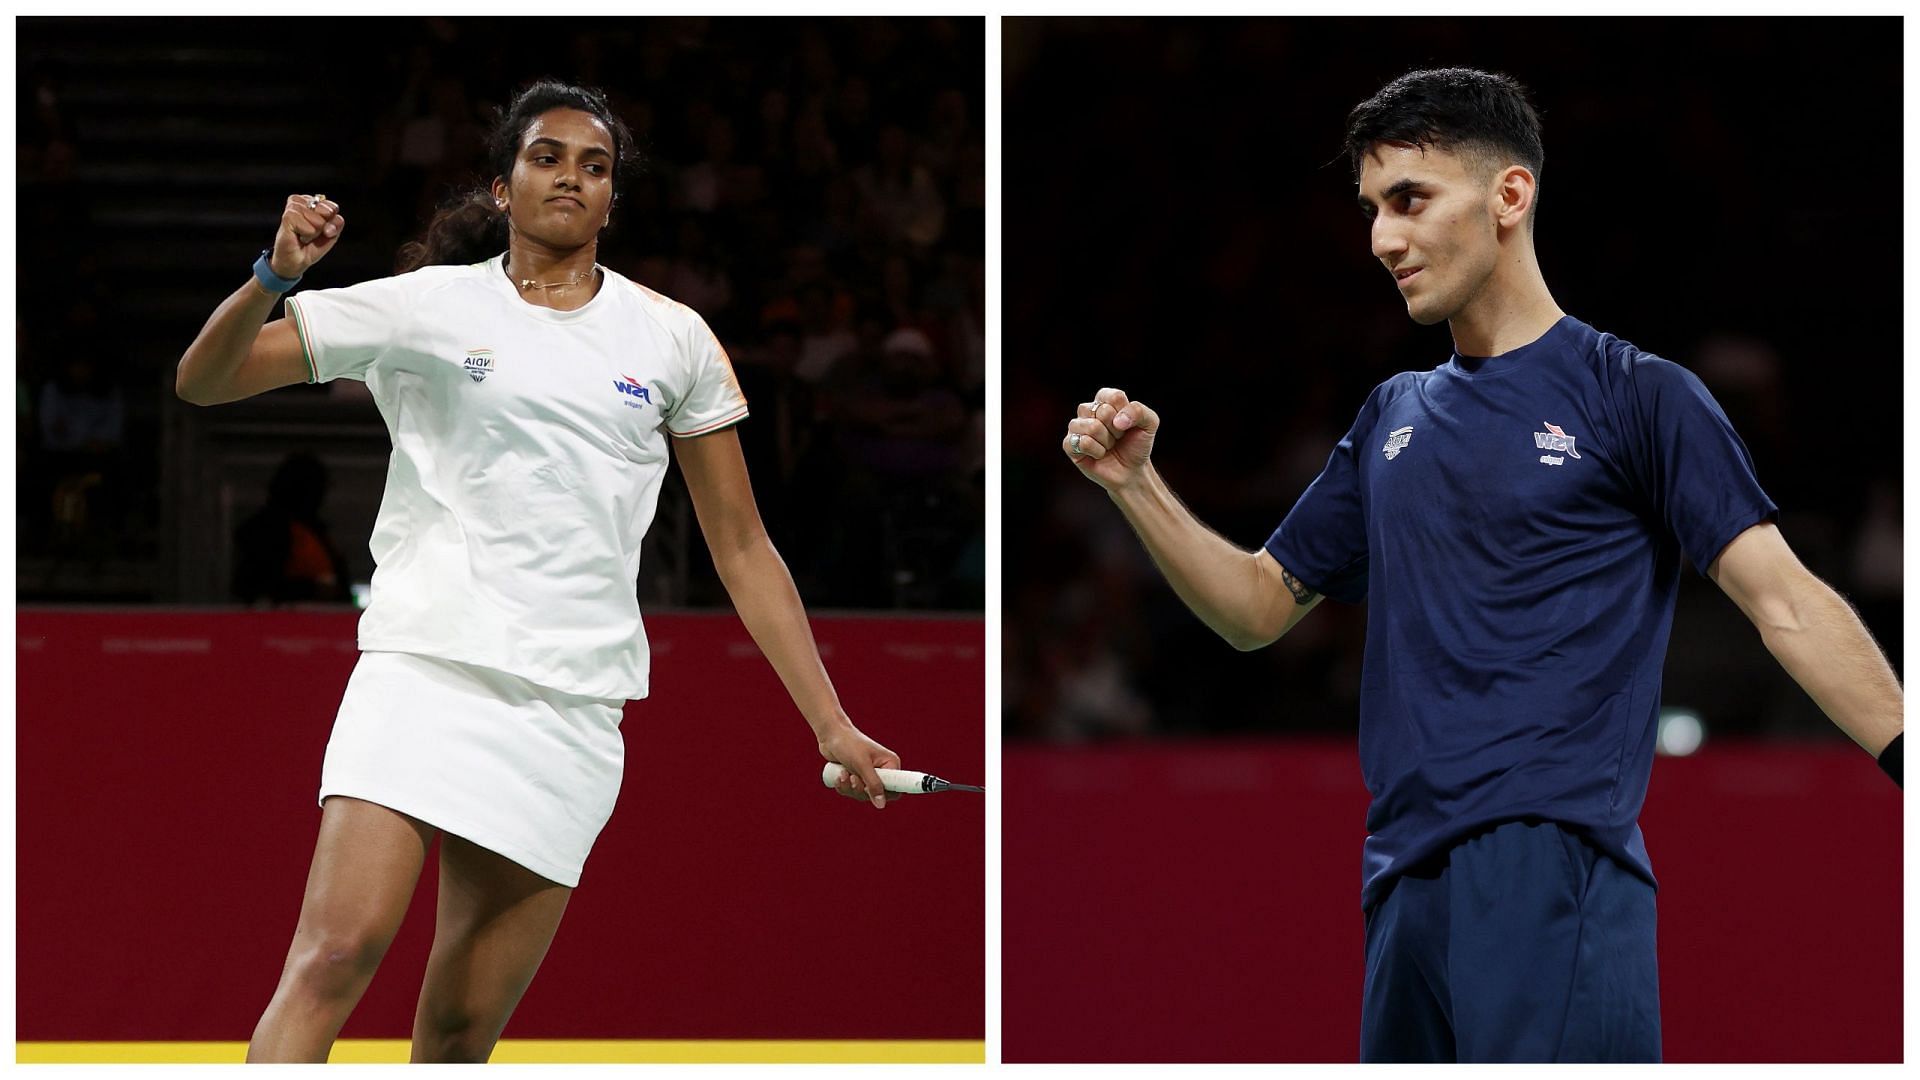 PV Sindhu and Lakshya Sen are through the quarterfinals of the 2023 US Open.